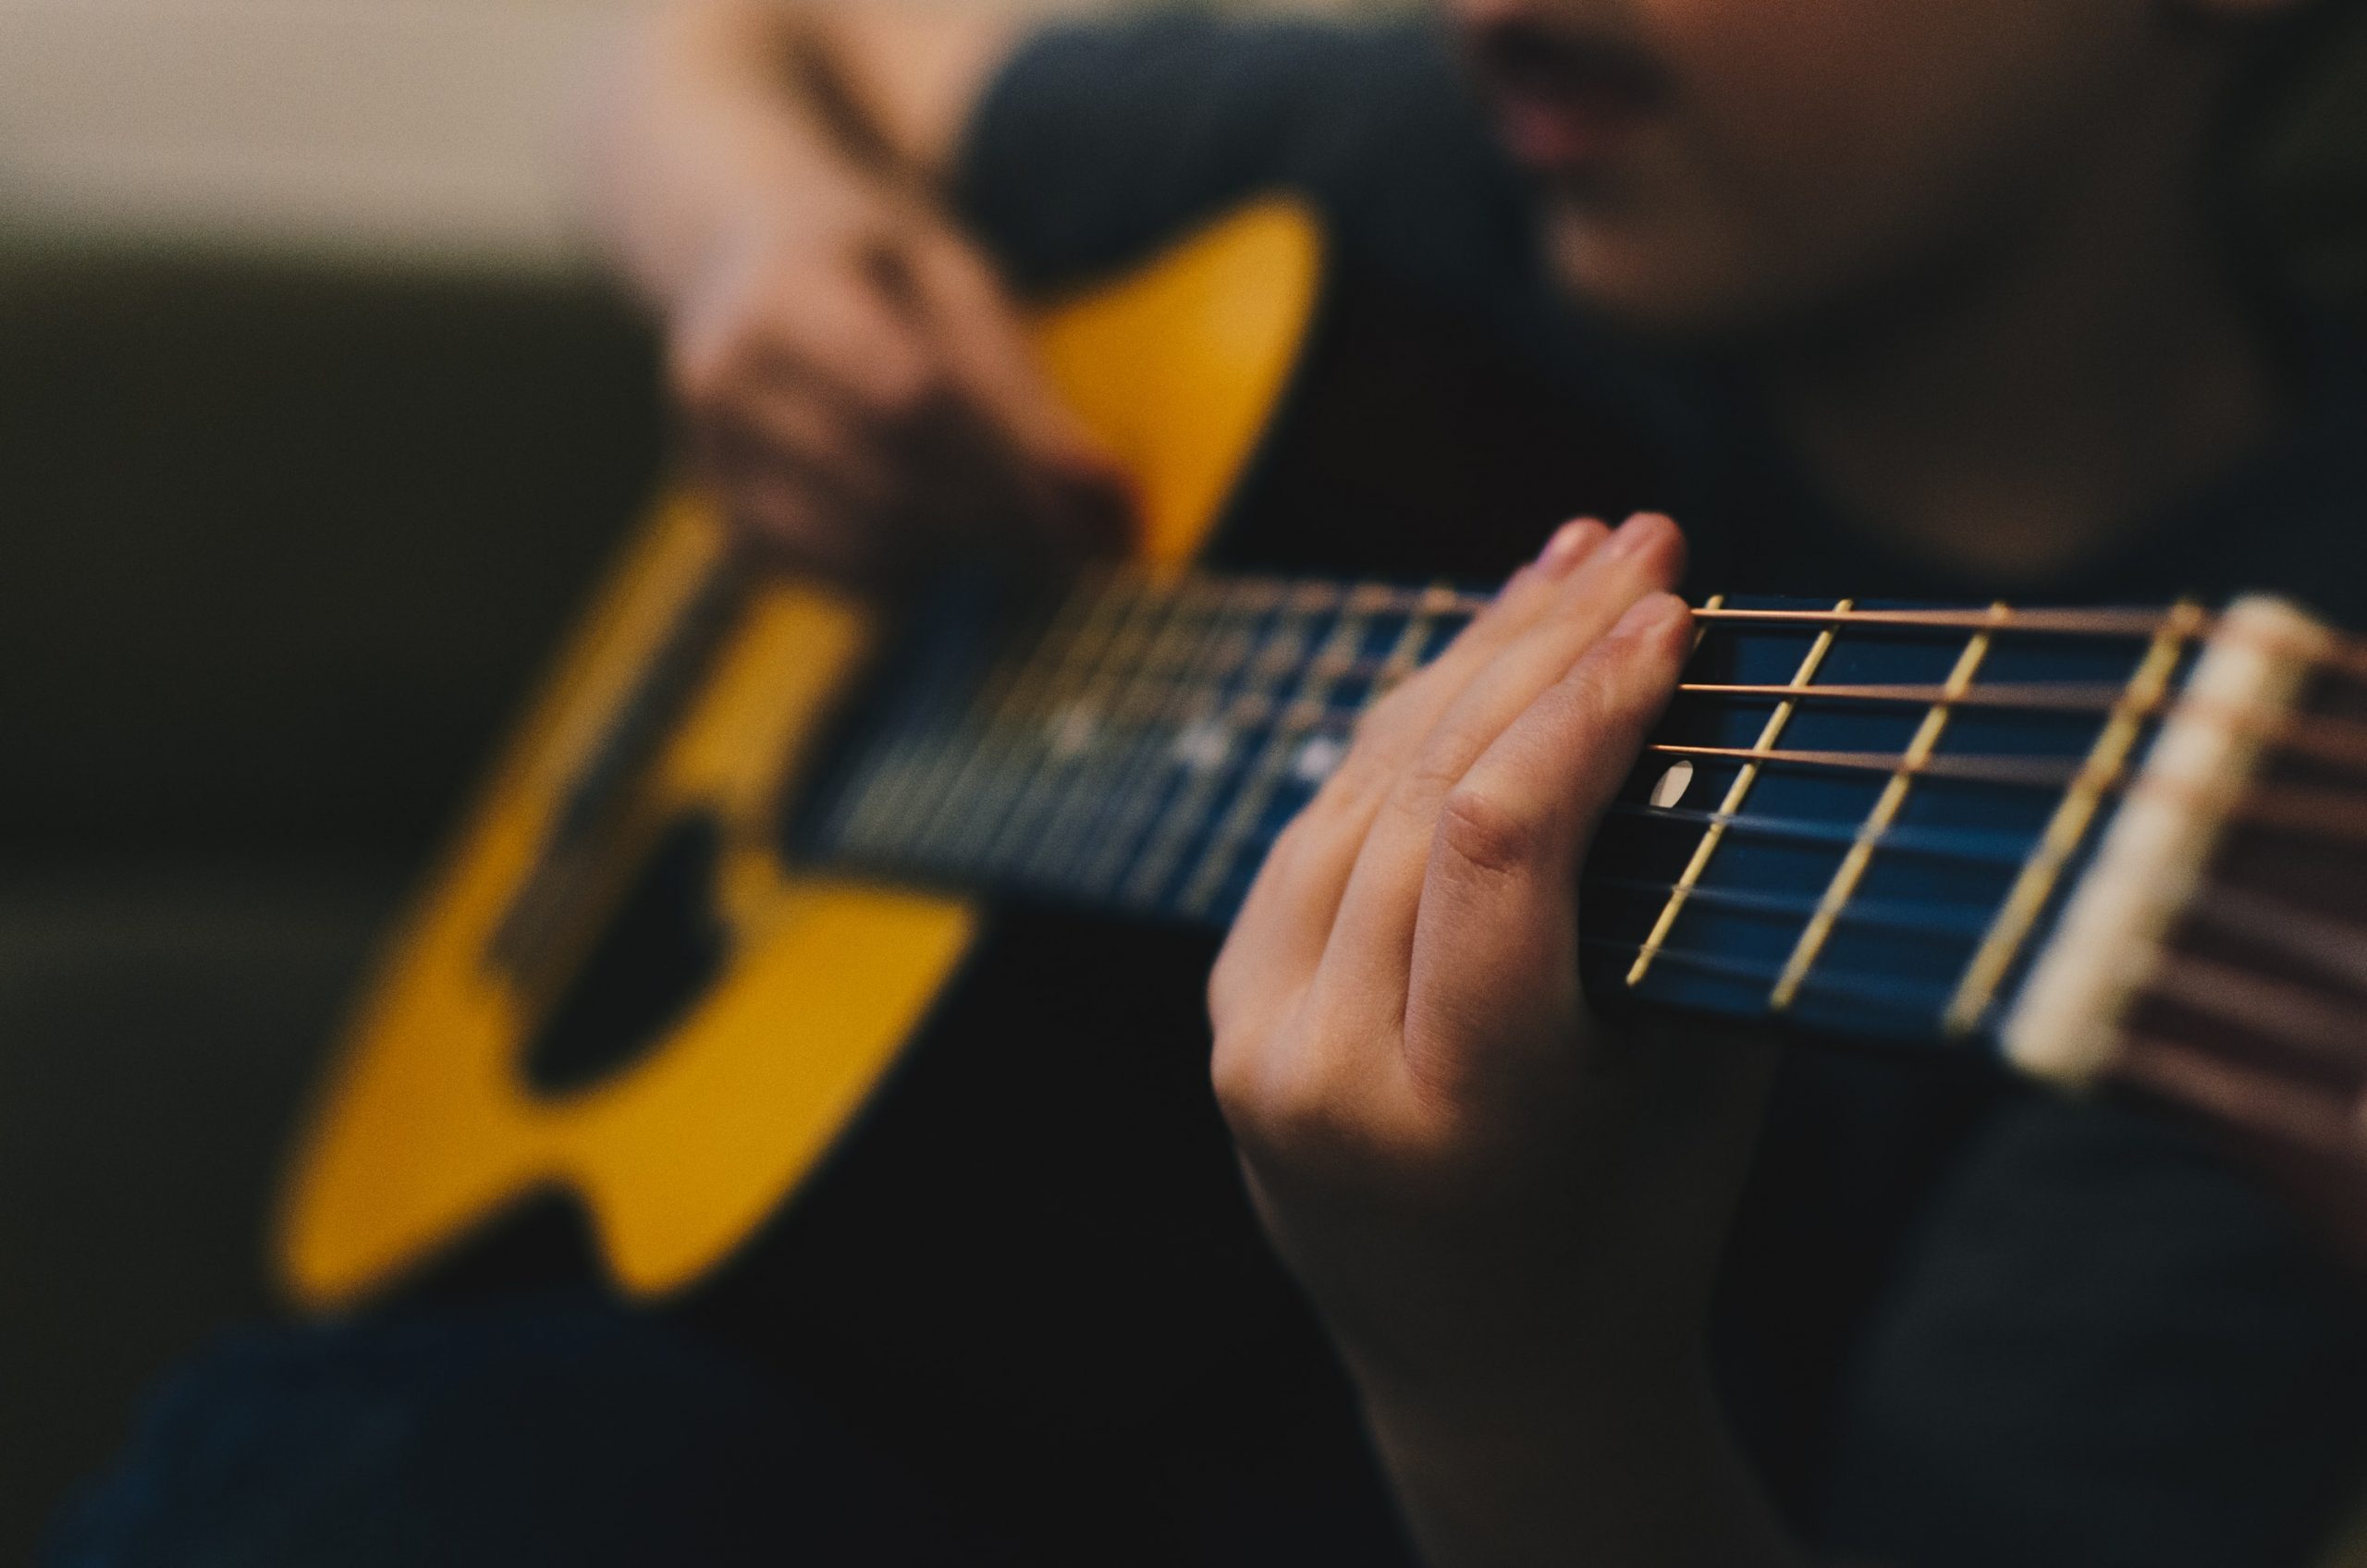 How to Play Faster Through Proper Guitar Posture